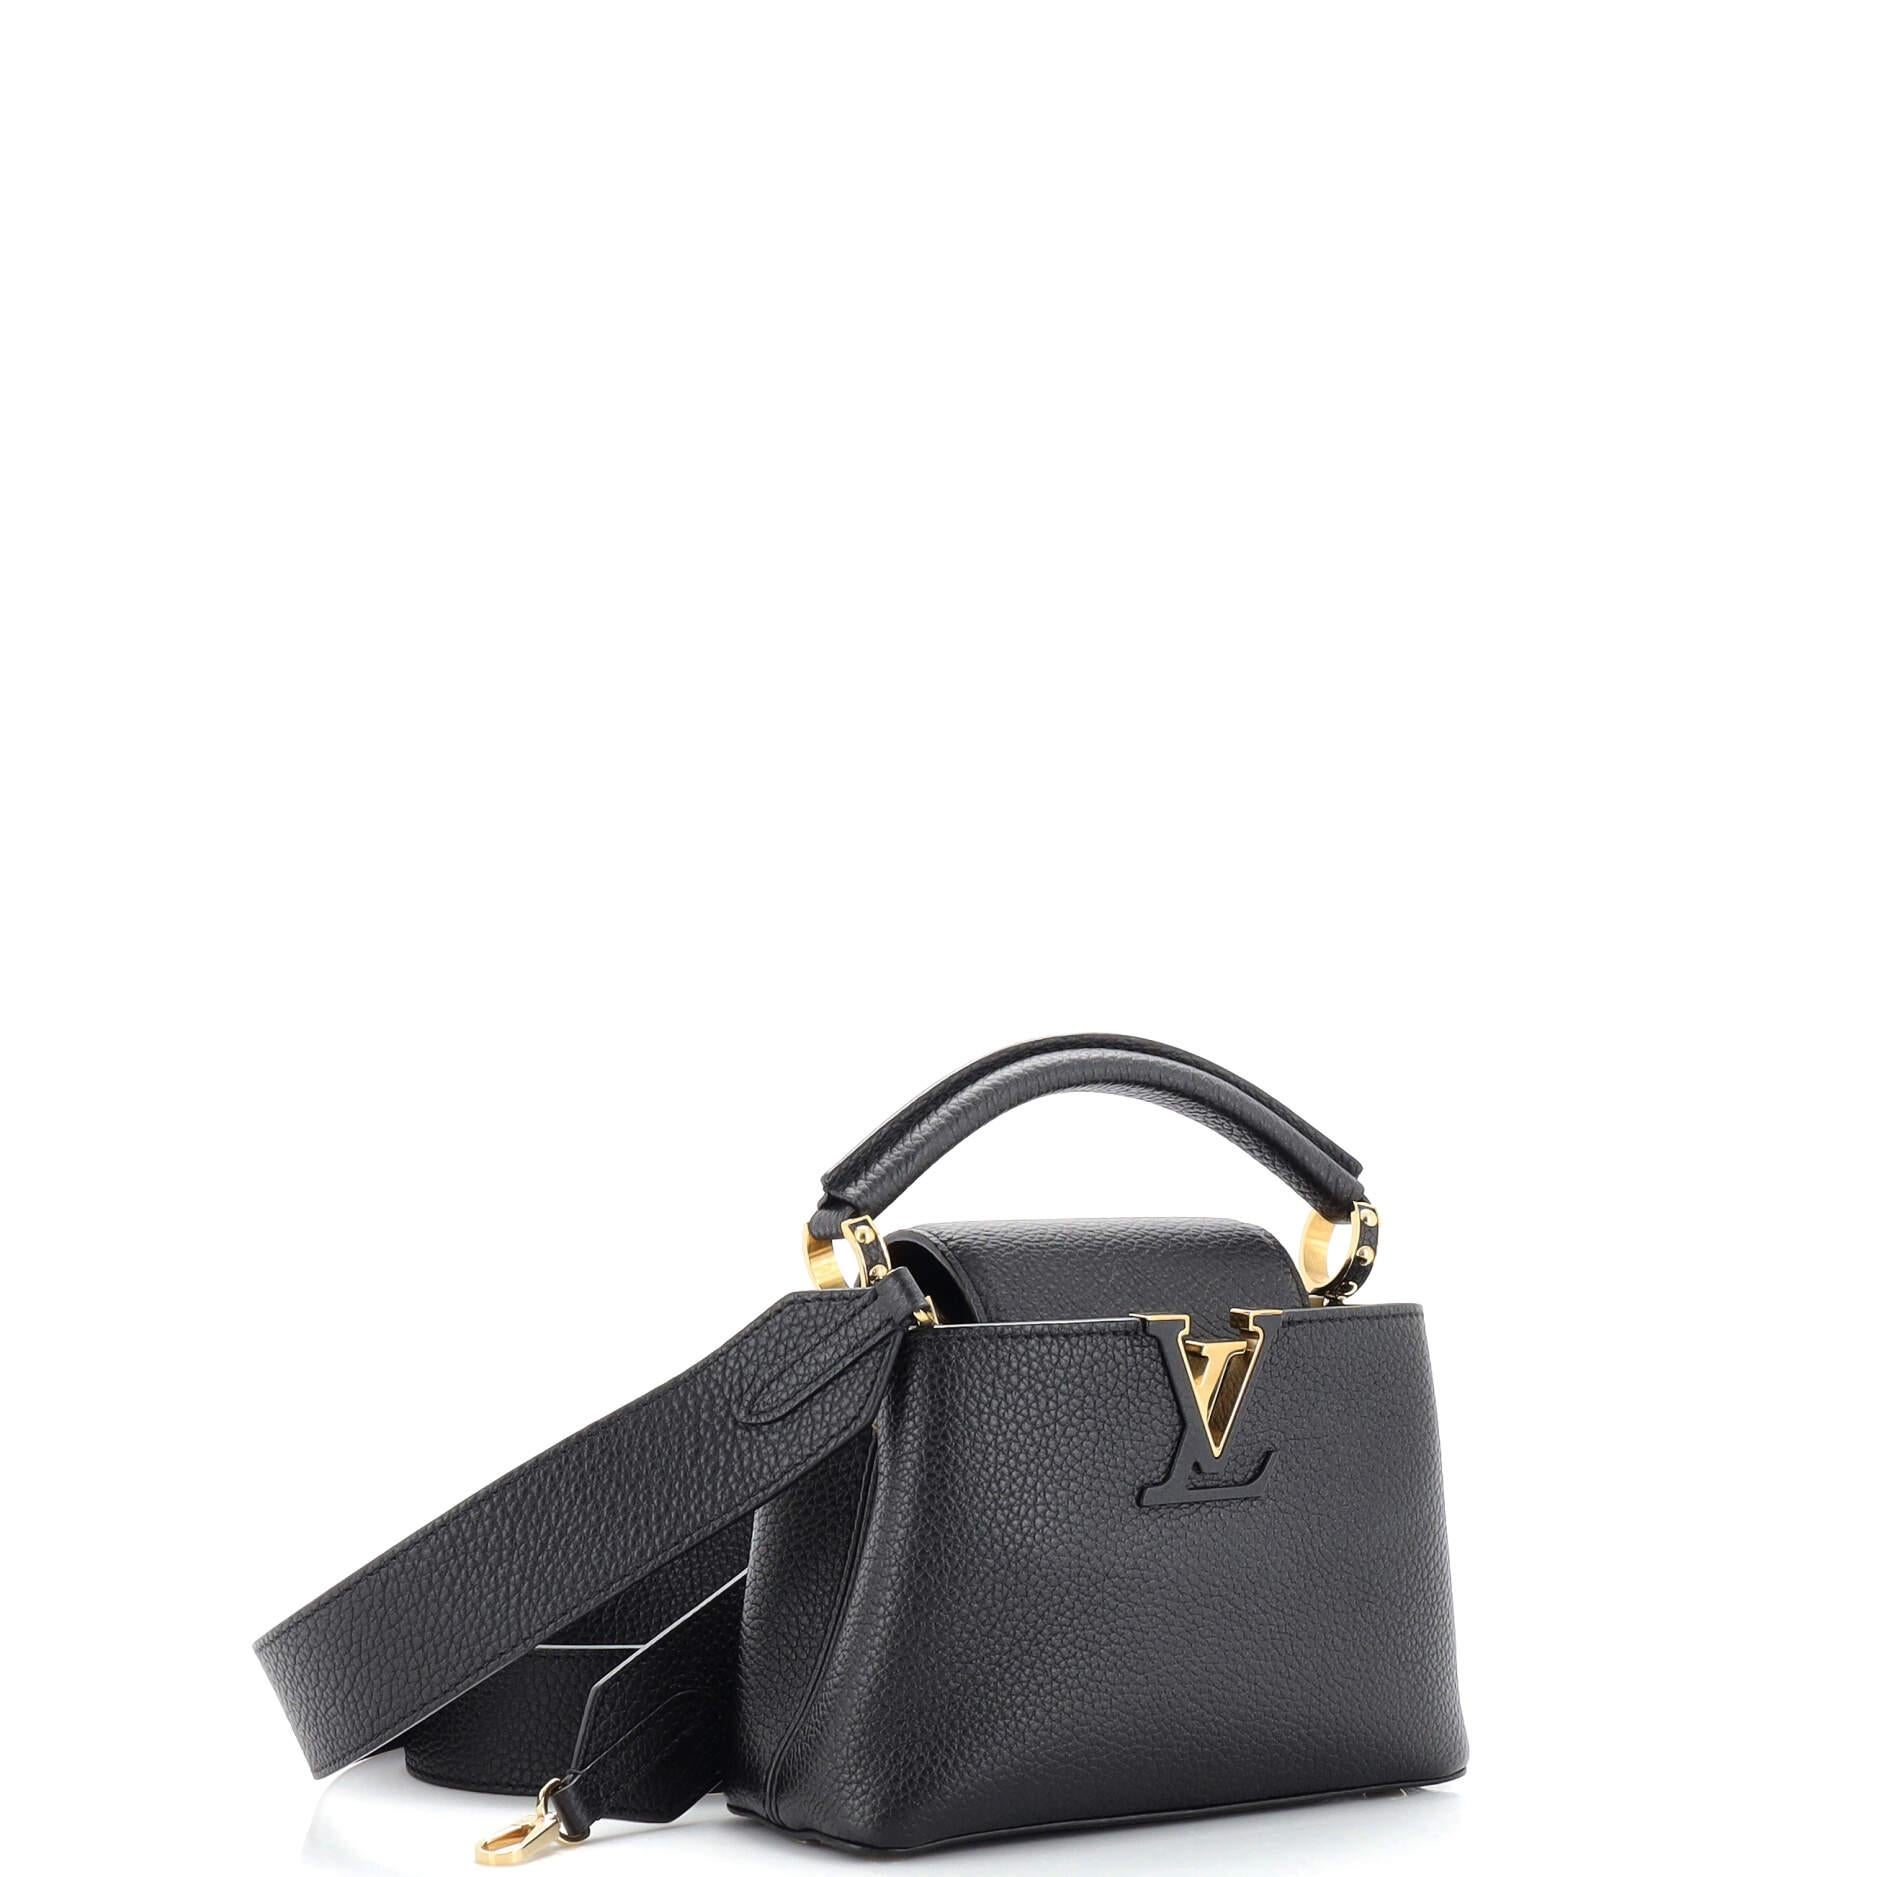 Mini Louis Vuitton Capucine in Ostrich Leather sourced by us